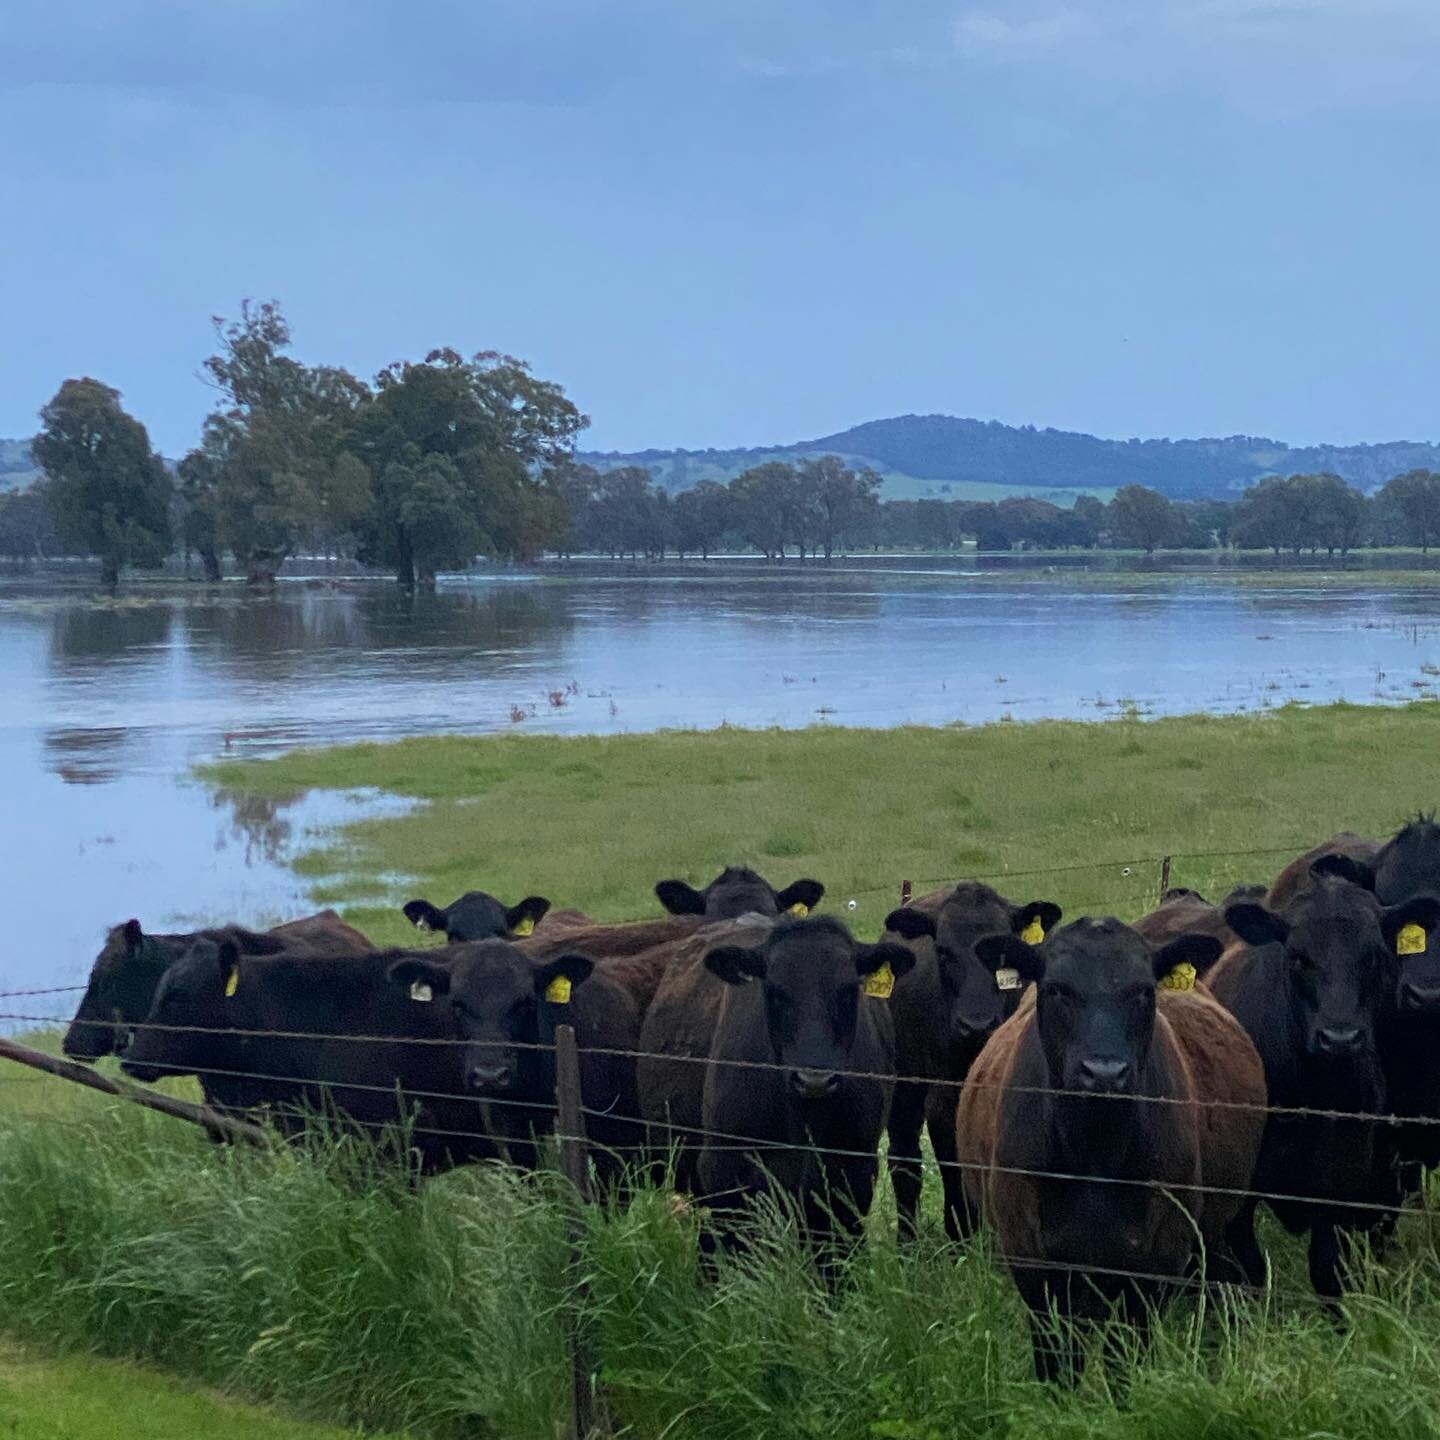 The Murrumbidgee did her thing at home over the course of today- these moos are happily high and dry but instead of river flats we now have ocean views! Mother Nature is both a beauty and a beast. #paperpear #waggawaggafloods #waggawagga #regionalnsw